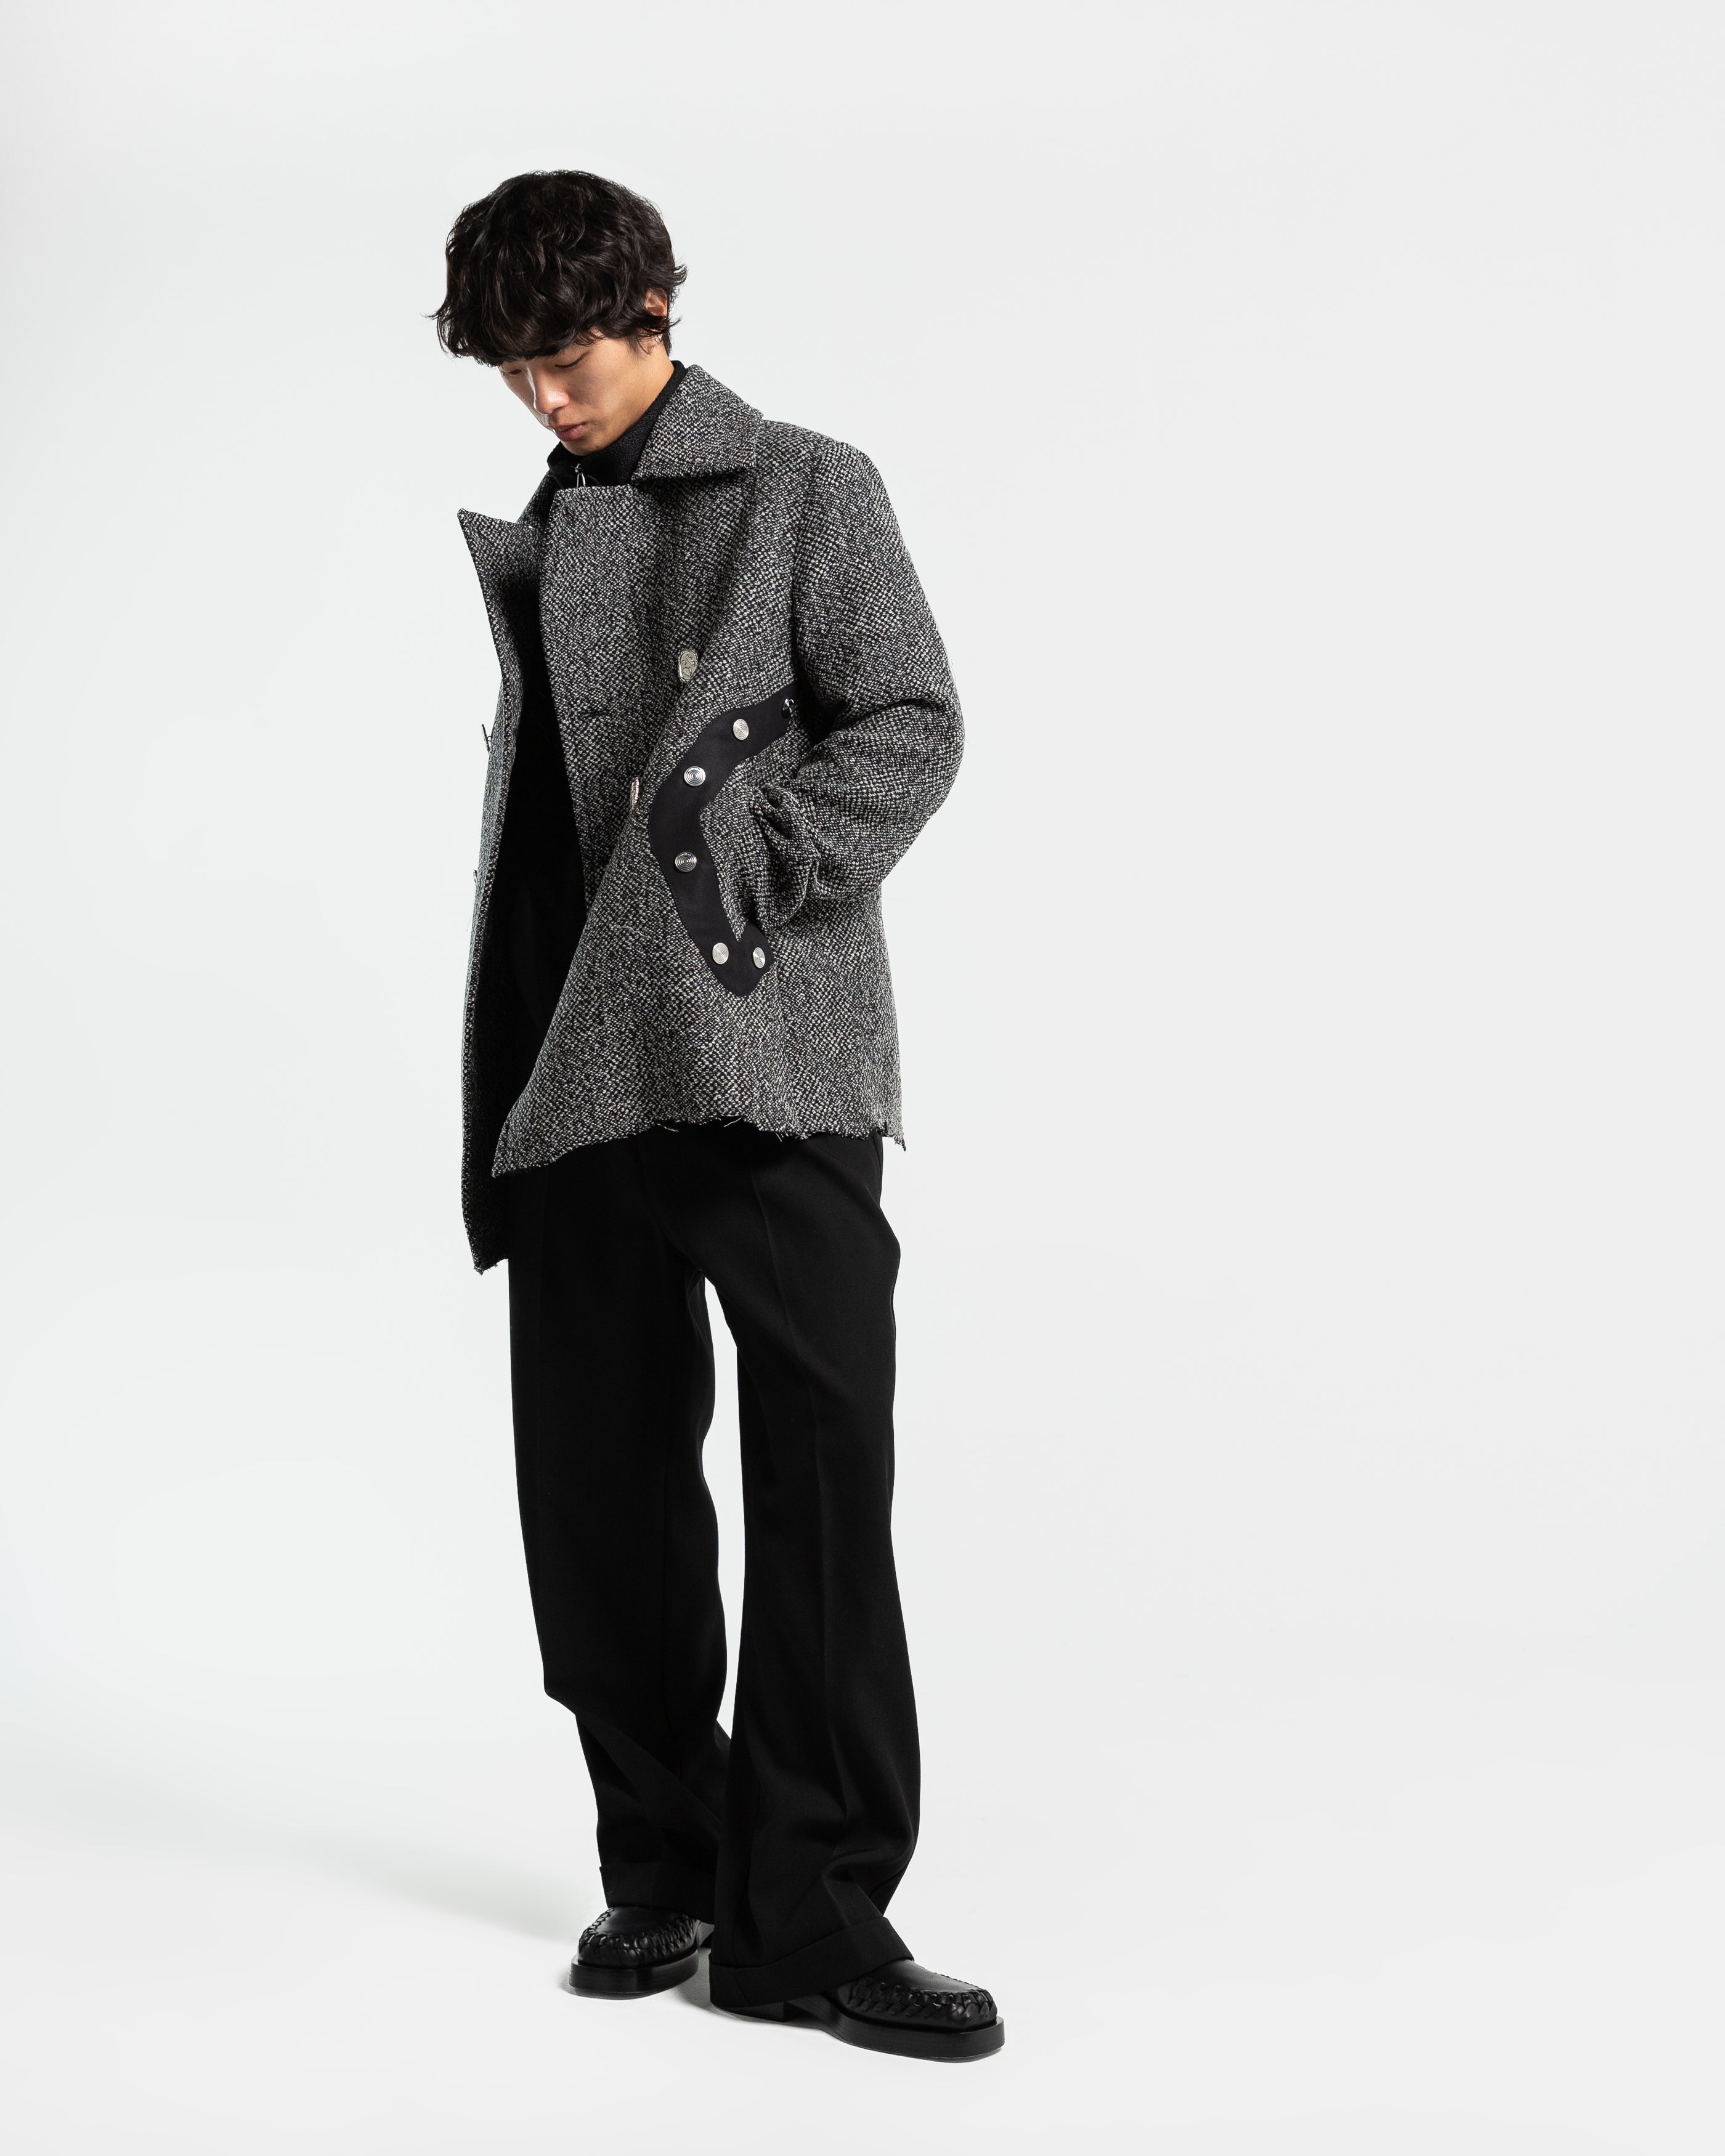 Alep Peacoat in Speckled Grey